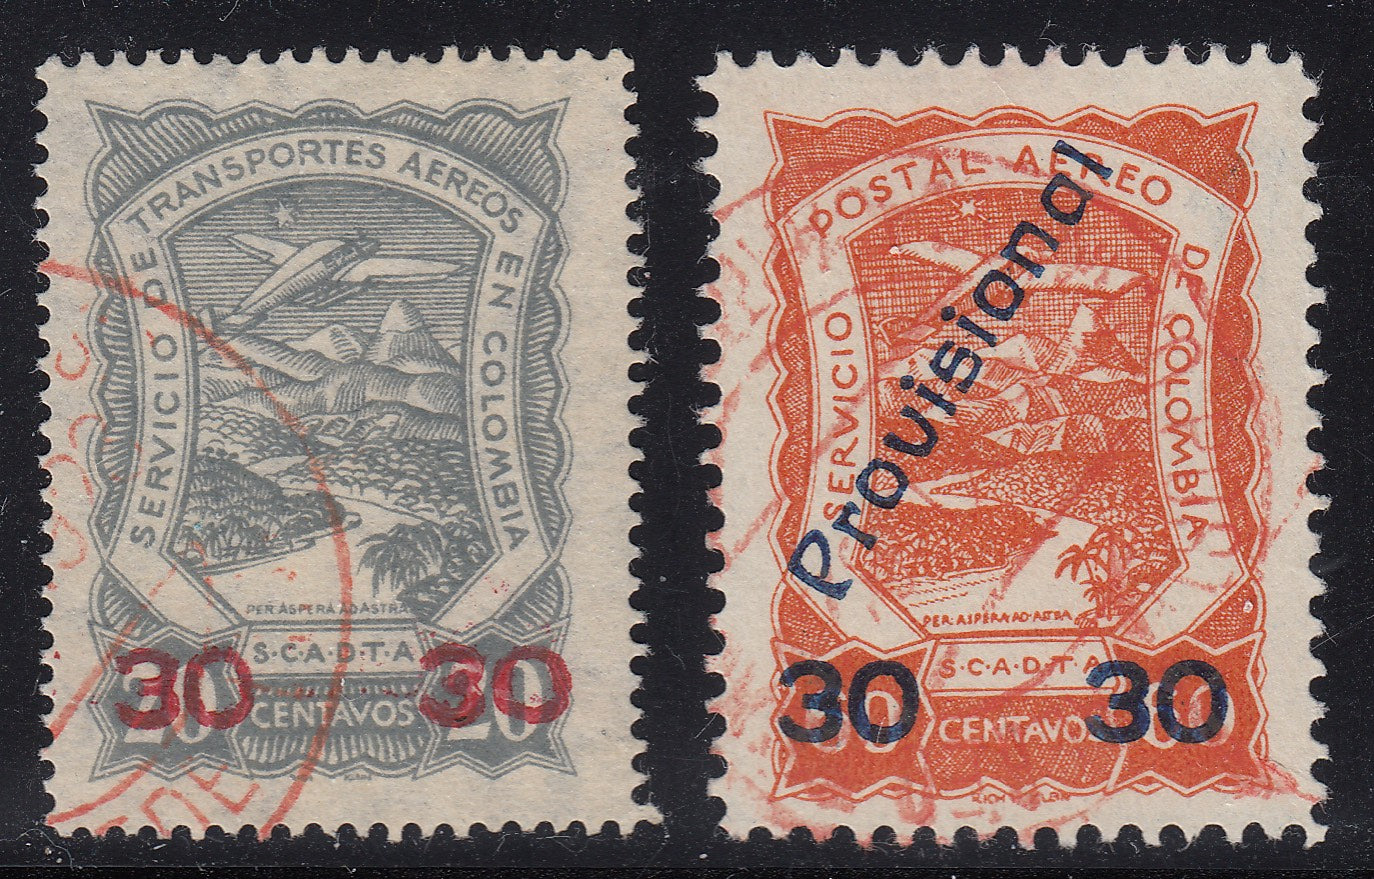 Colombia SCADTA 1923 Airmail Provisional Surcharge Set Used. Scott C51 & C52